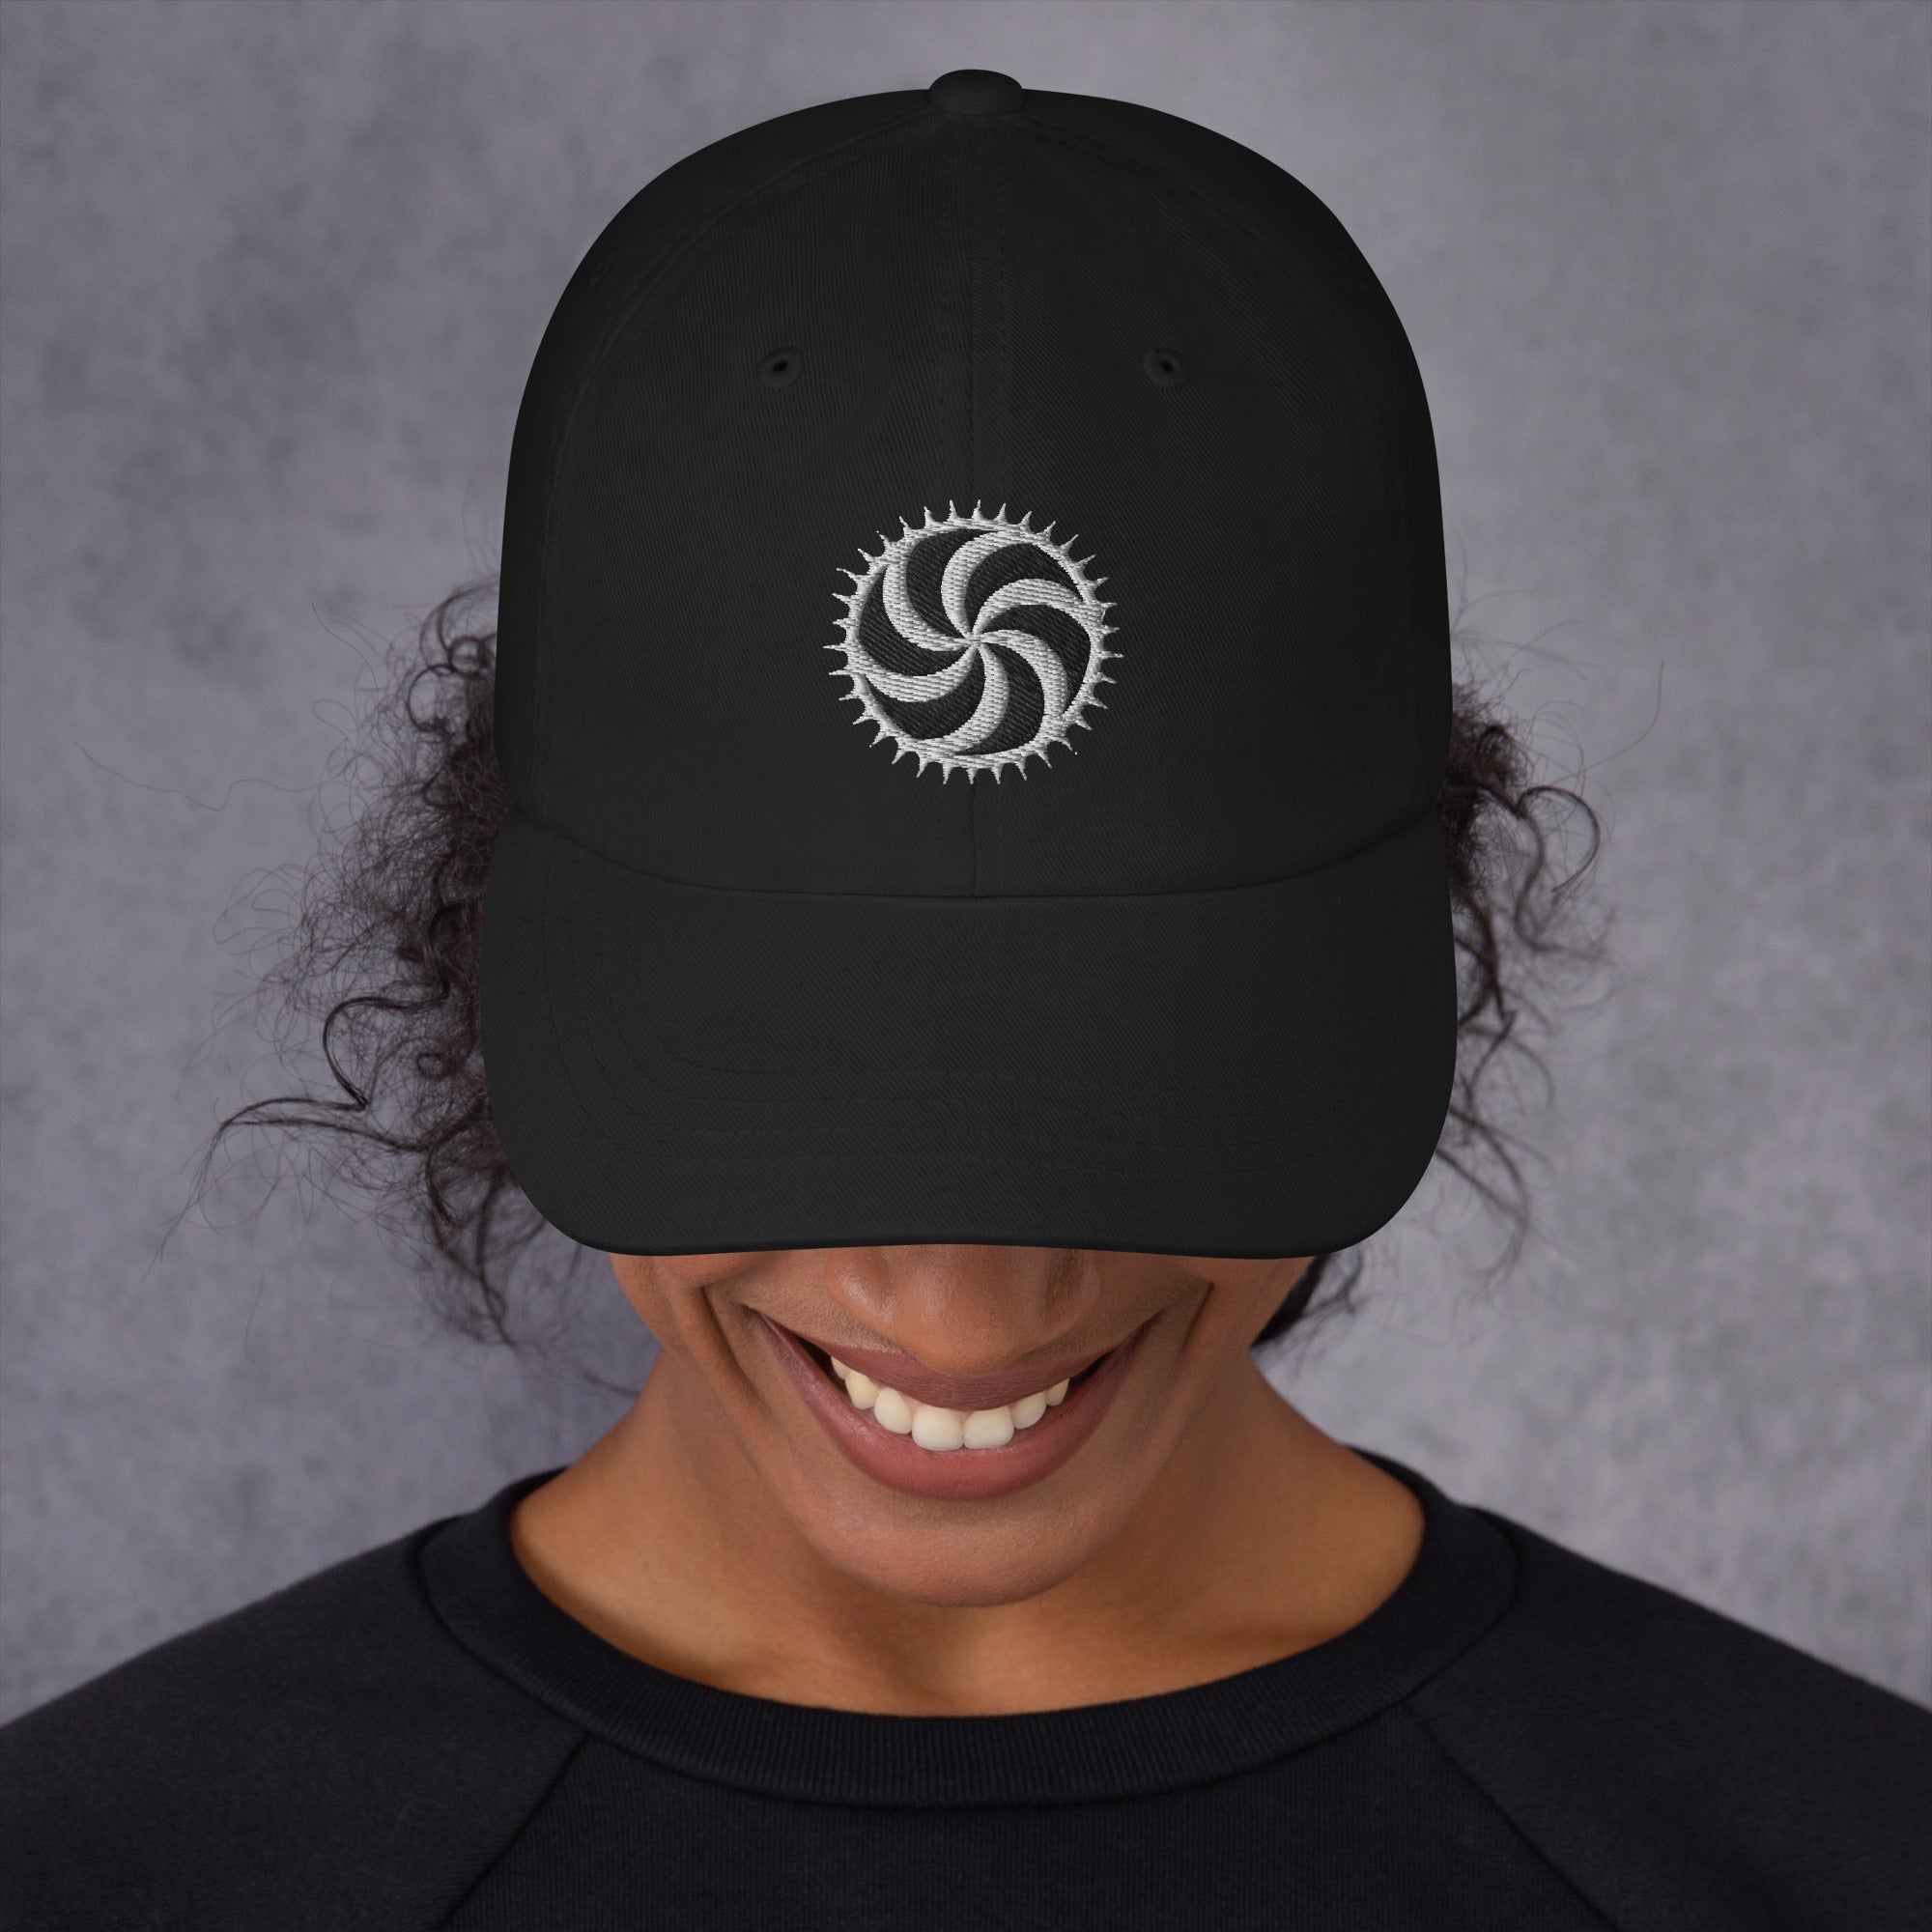 Deadly Swirl Spike Embroidered Baseball Cap Symbol Dad hat - Edge of Life Designs